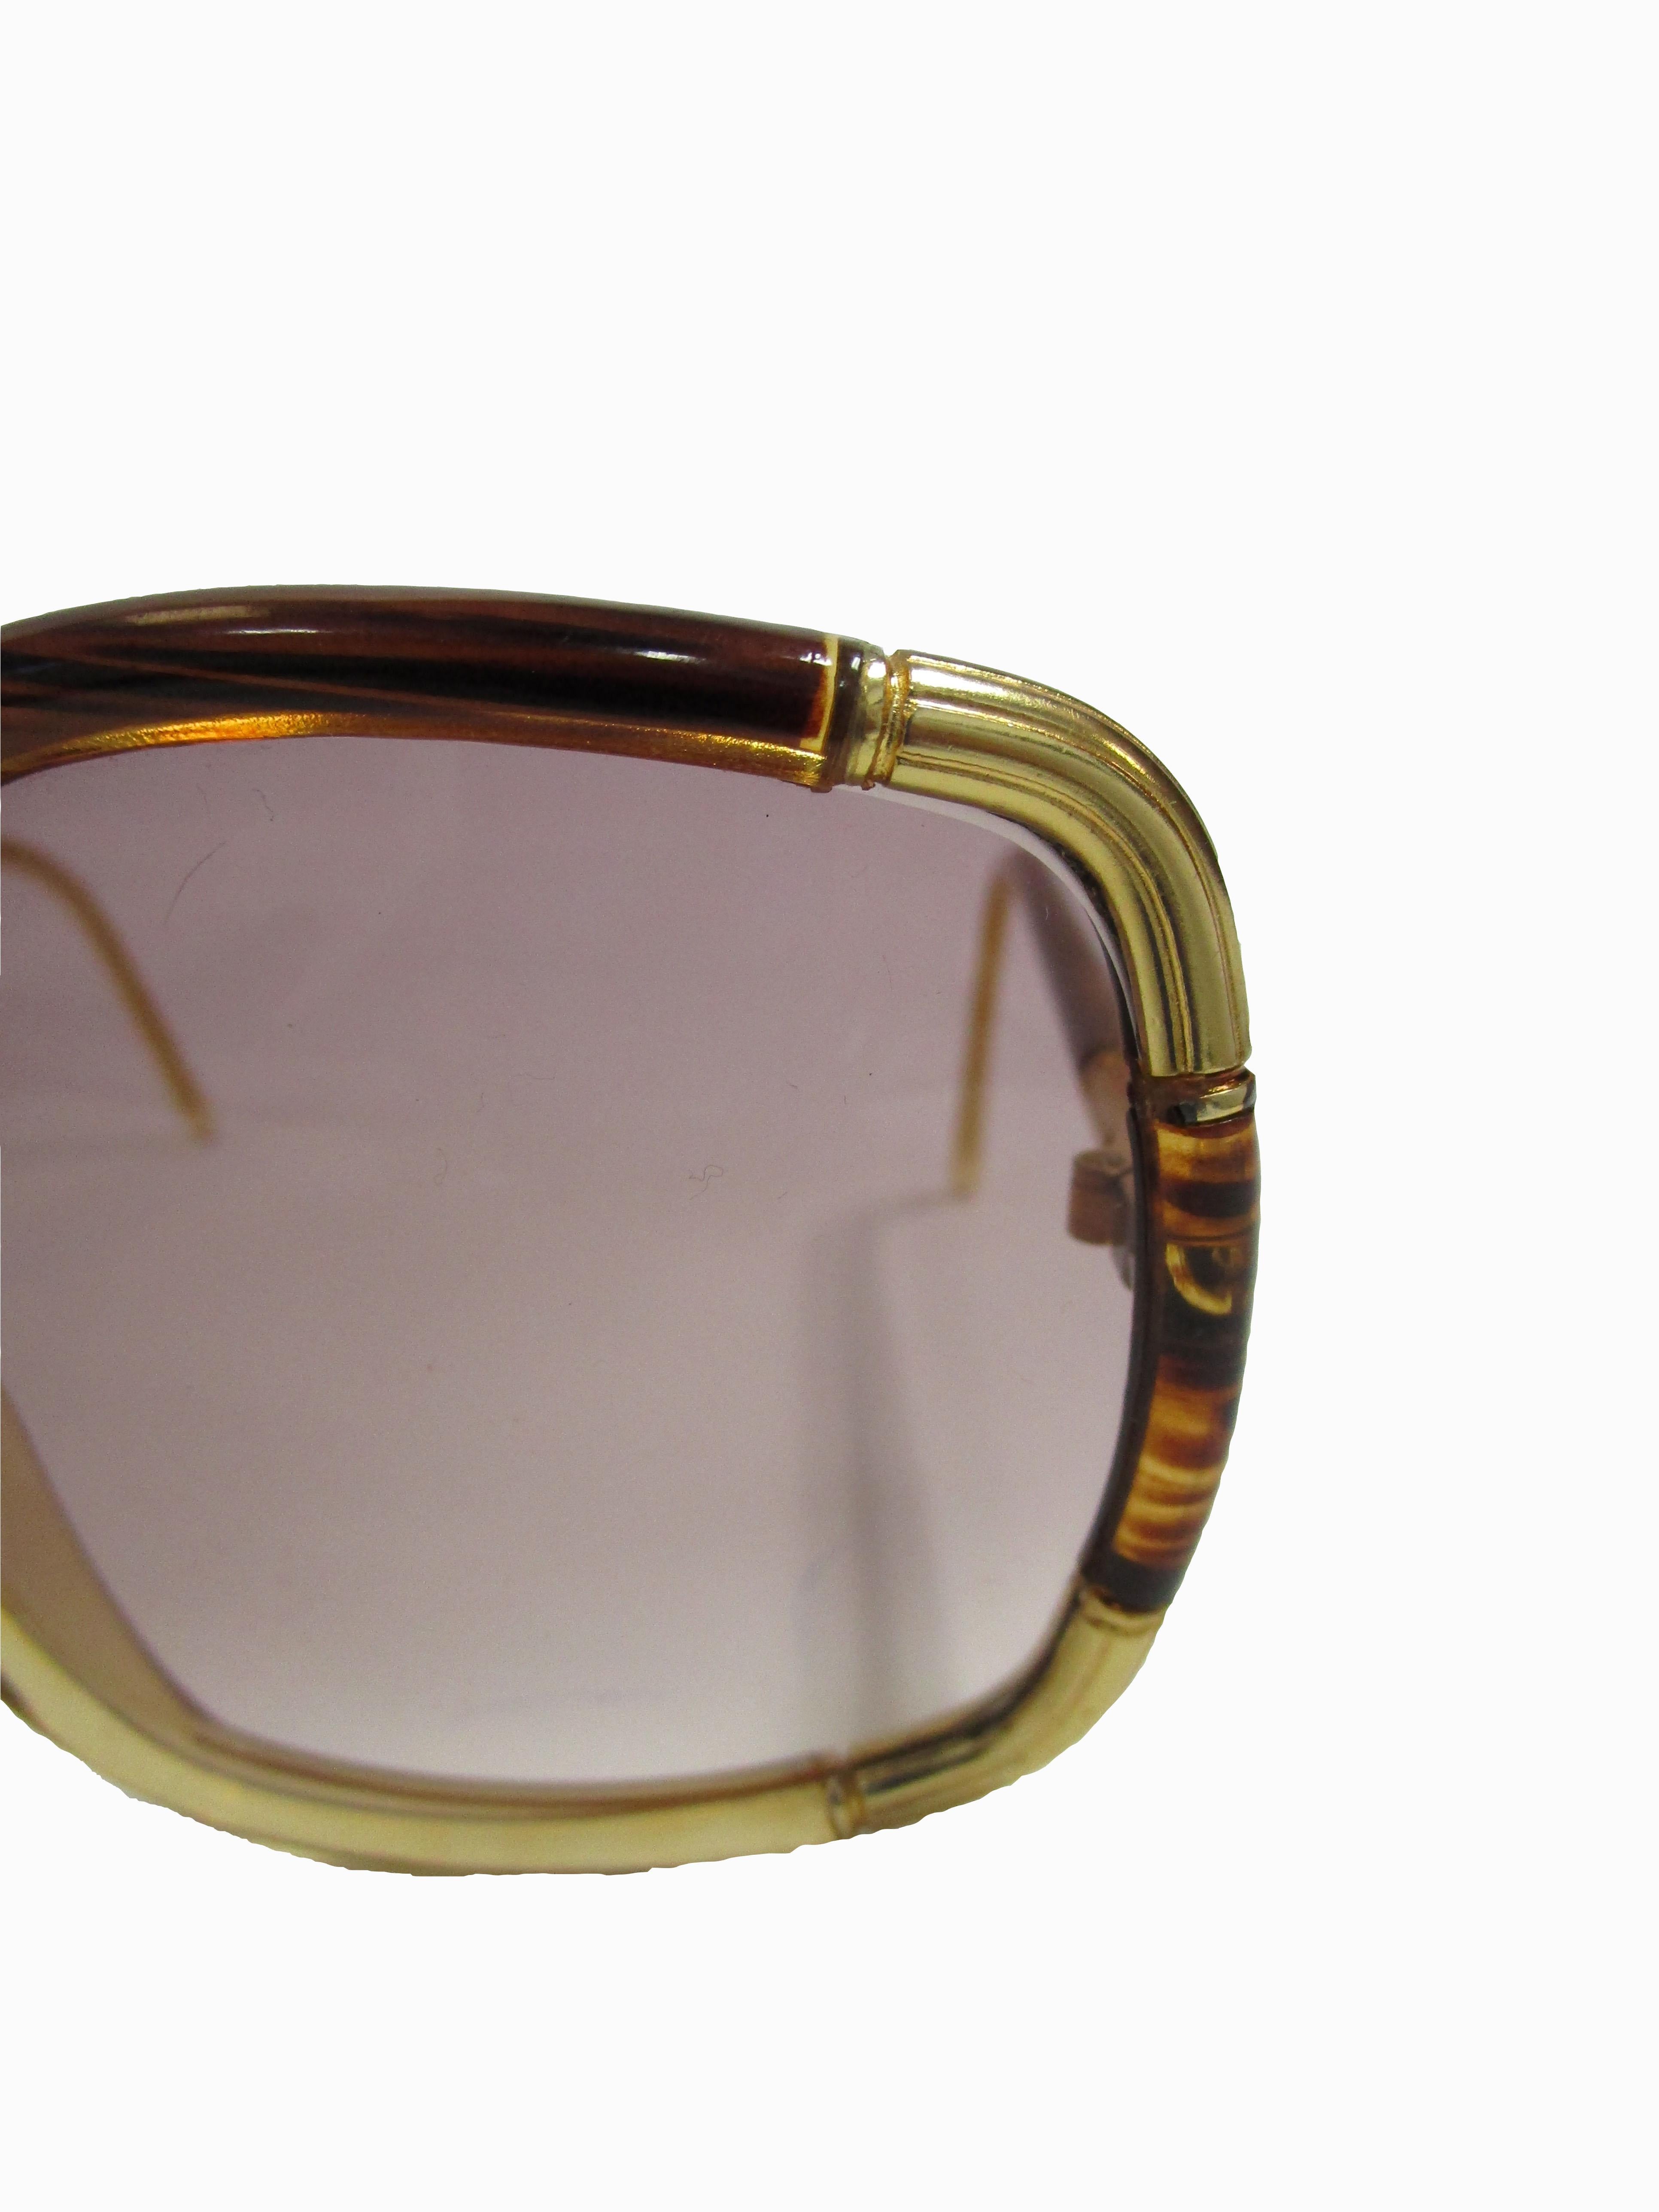 Women's 1970s Ted Lapidus Paris Gold Accented Tortoise Over-sized Sunglasses  For Sale